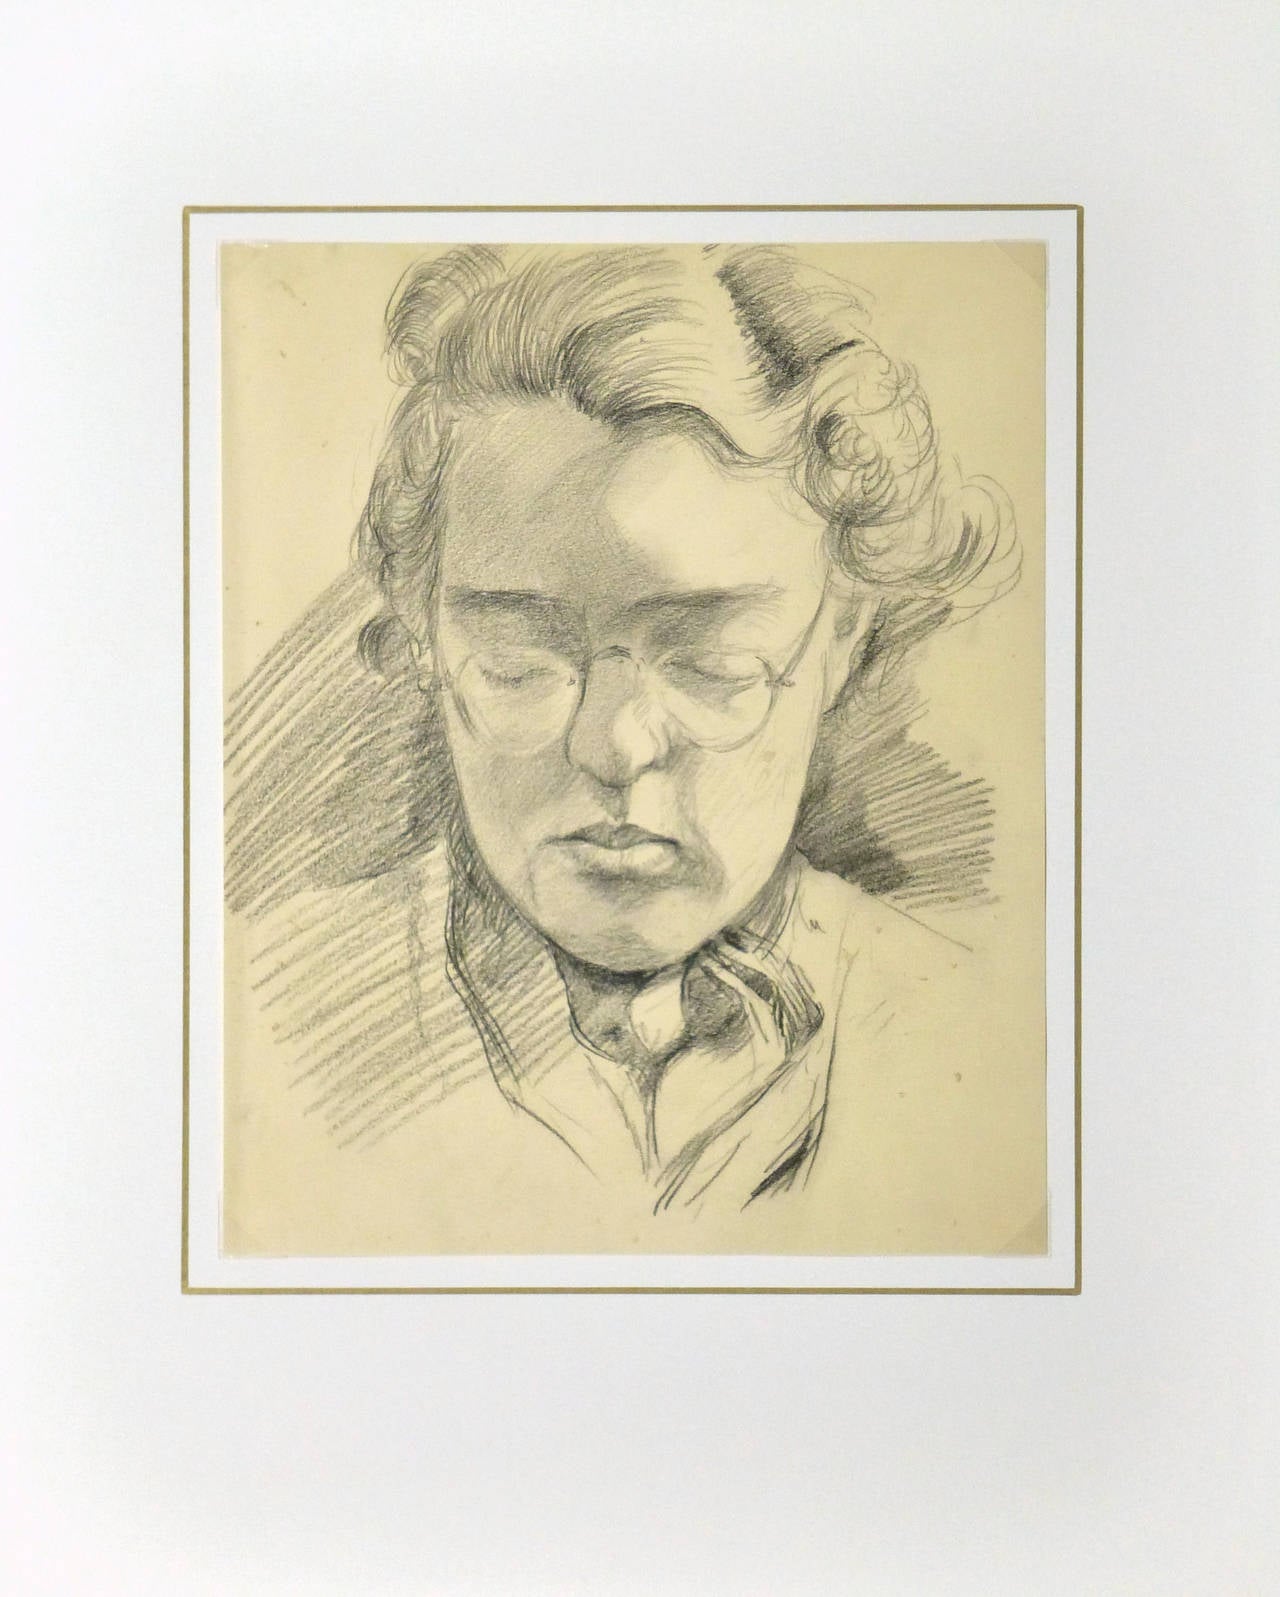 Vintage Pencil Drawing of Woman - Brown Portrait by W. Langer